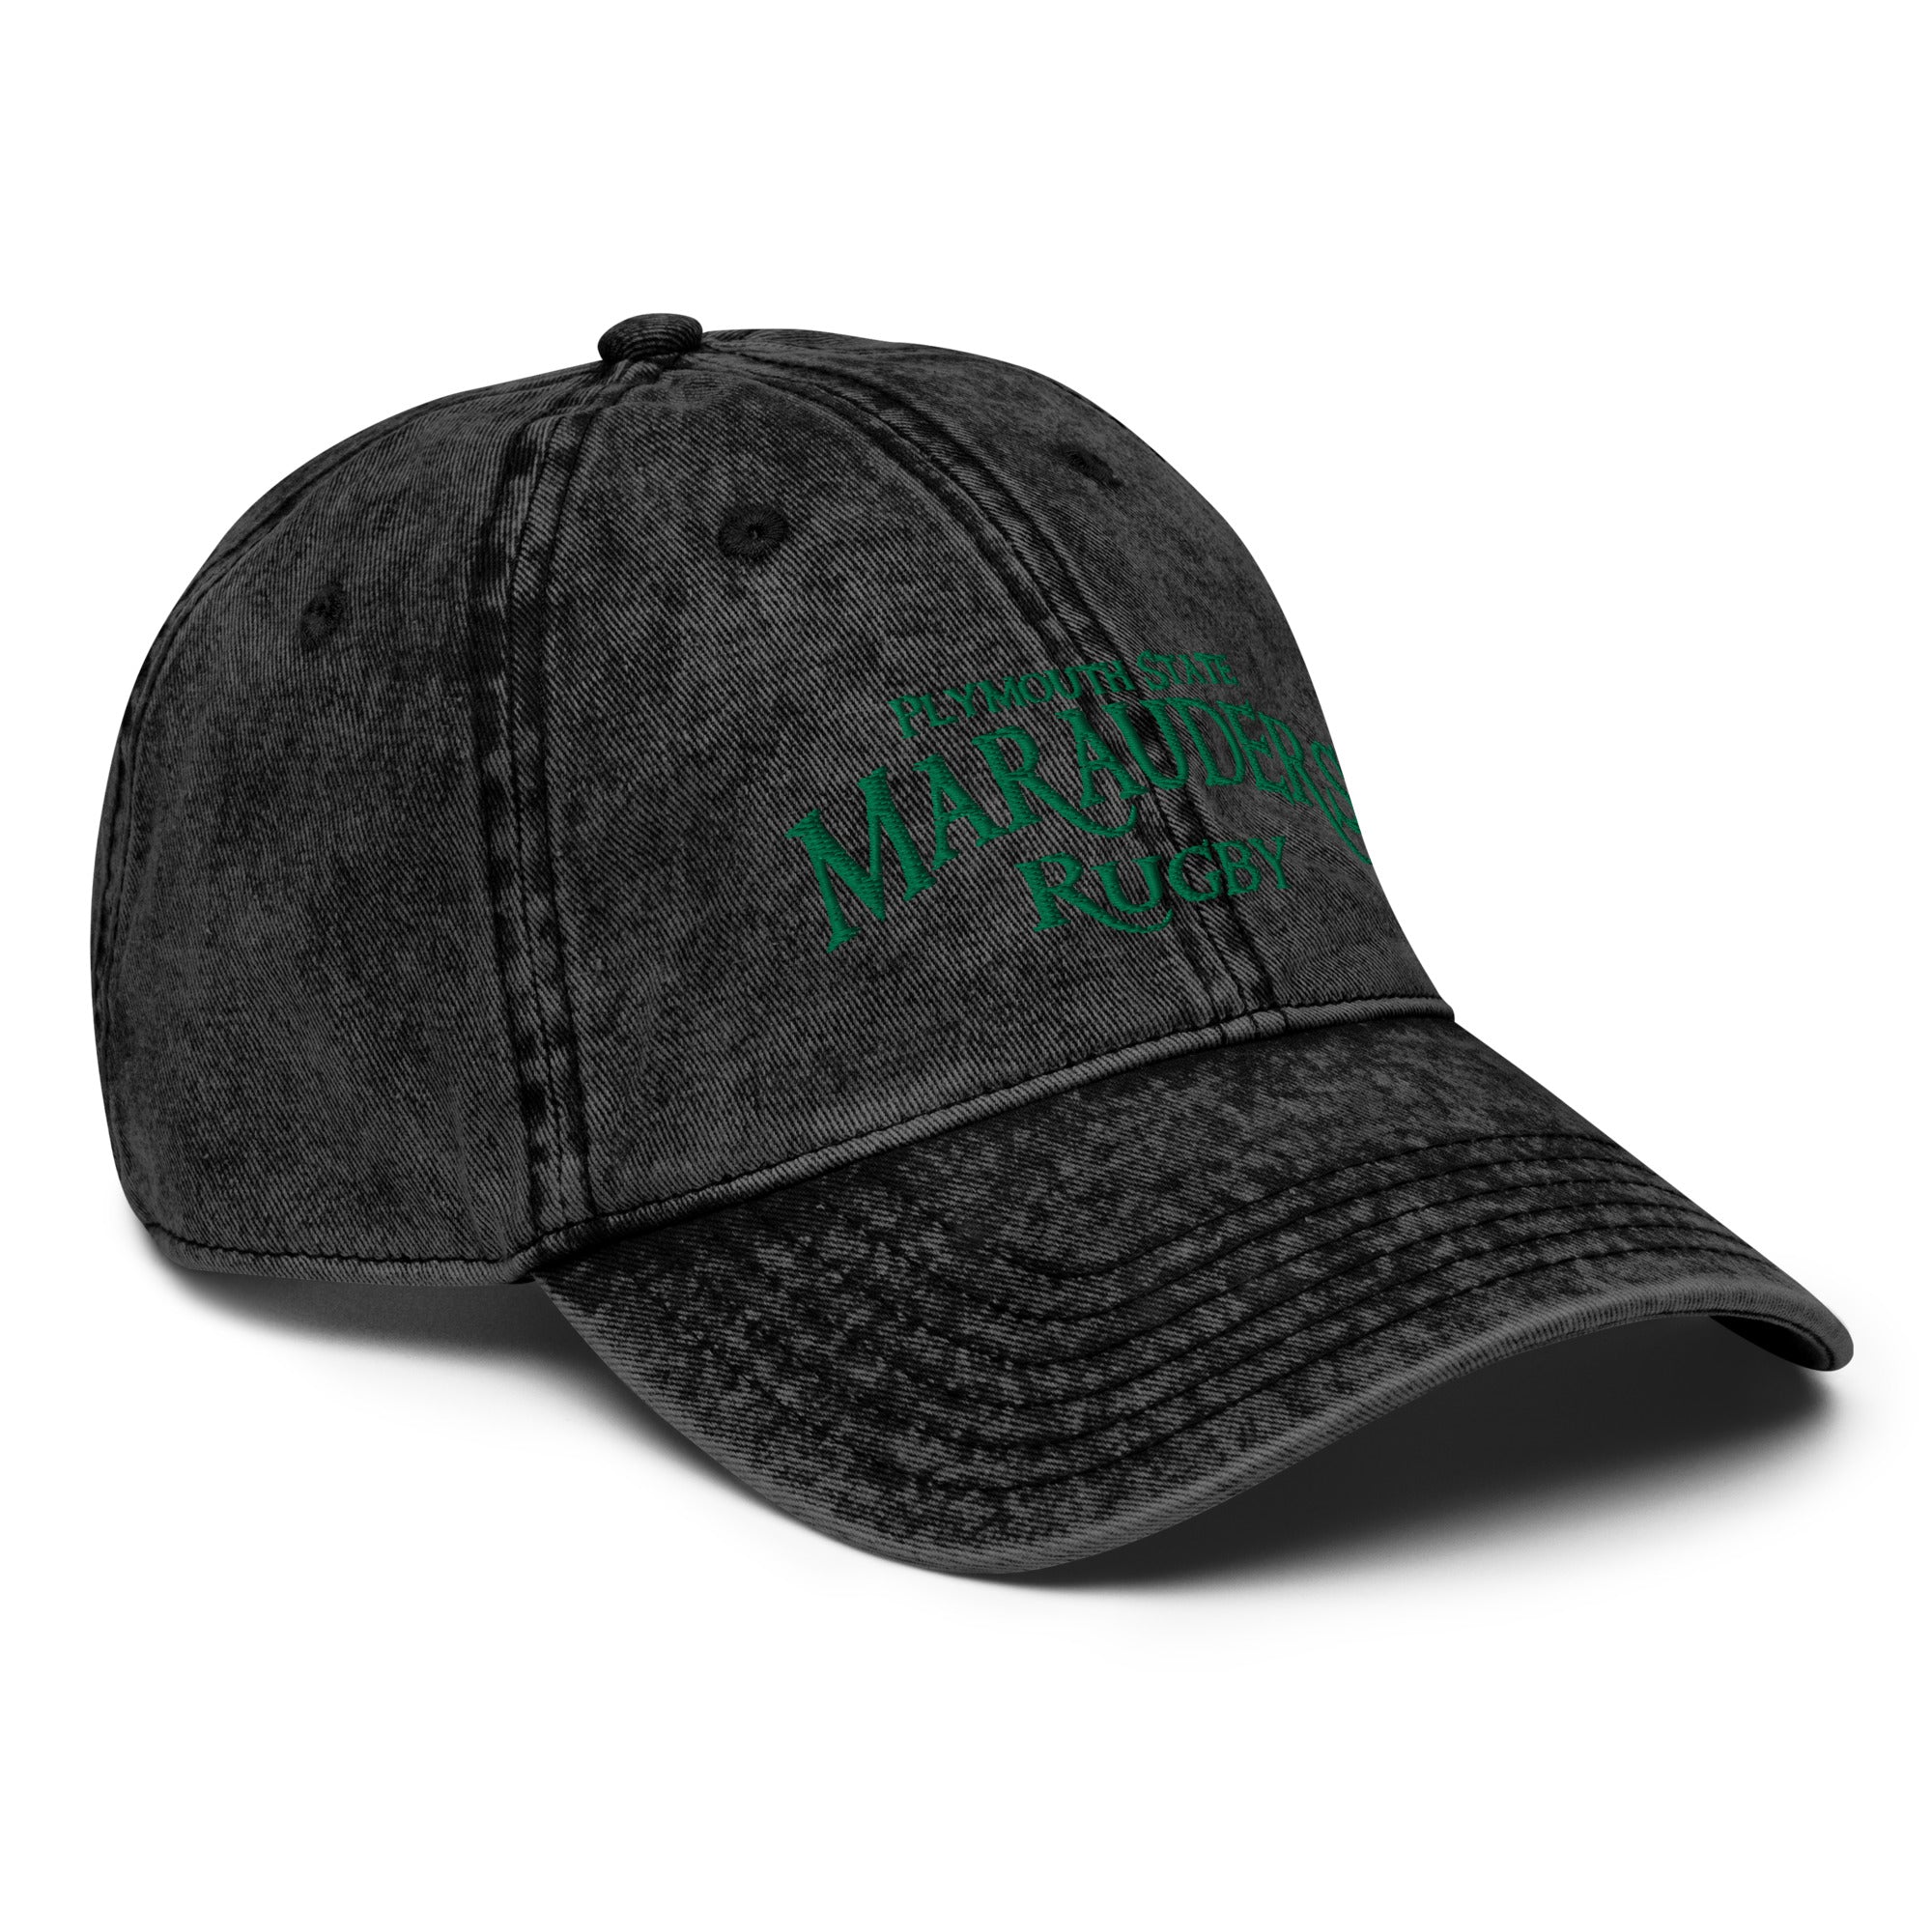 Rugby Imports Plymouth State WRFC Vintage Twill Cap